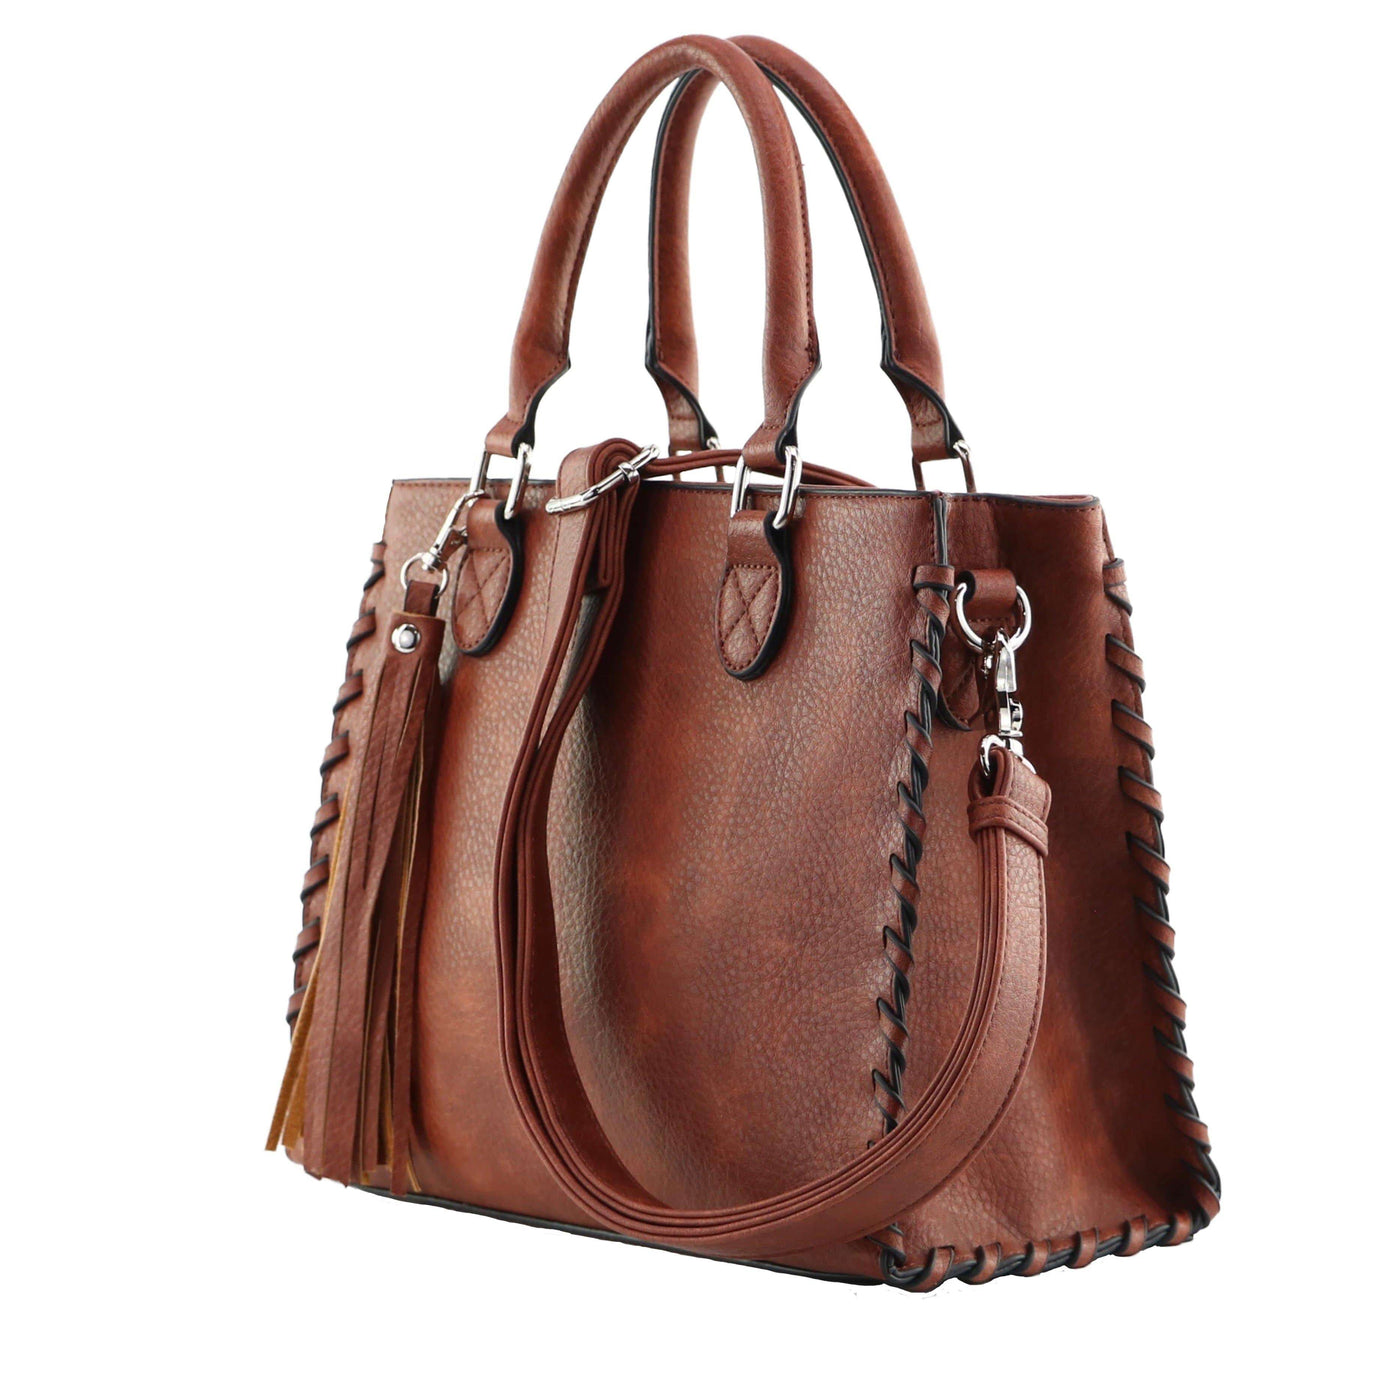 Lady Conceal Concealed Carry Purse Mahogany Concealed Carry Ann Satchel Bag by Lady Conceal